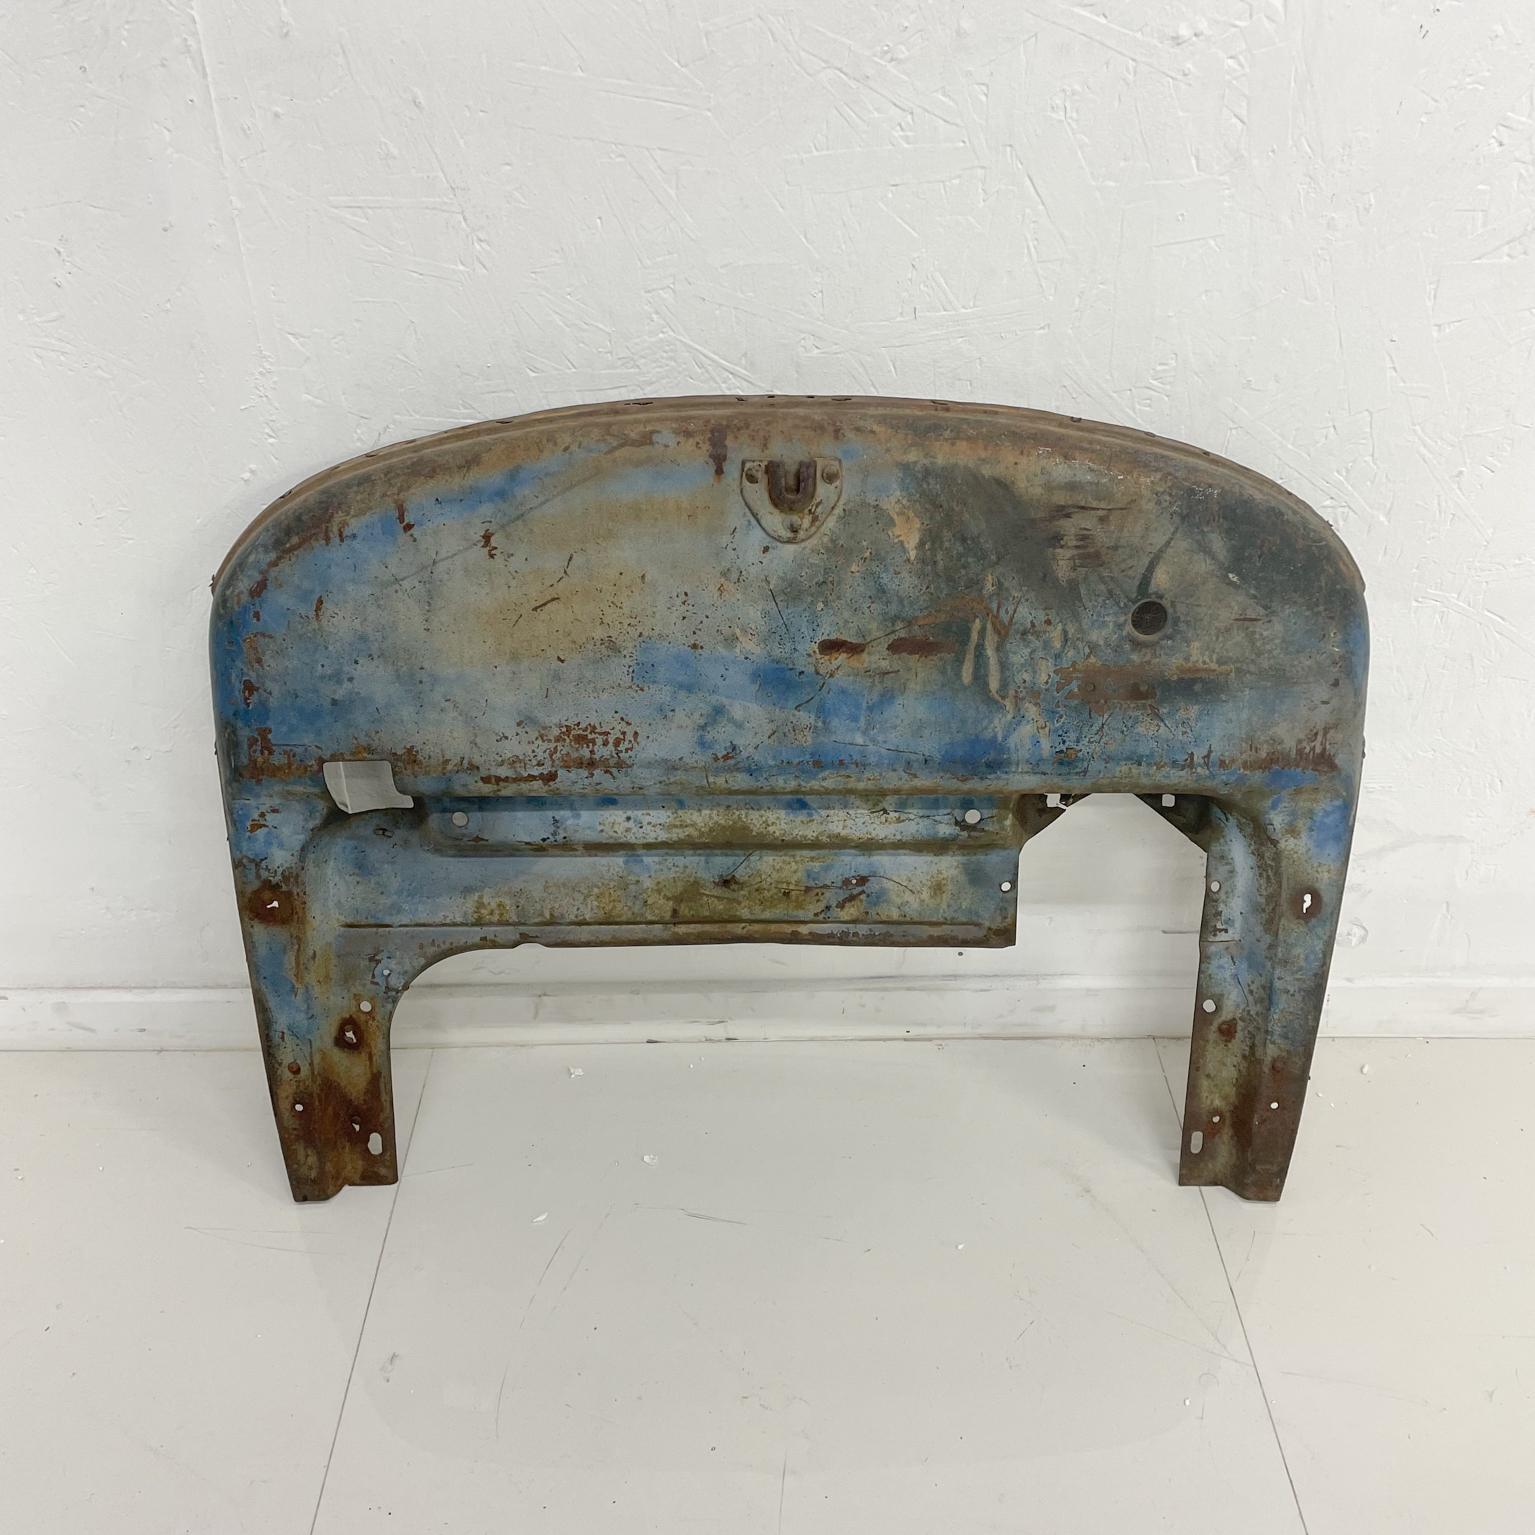 Art
Salvaged Art Blue Oxidized Old Metal Piece in tarnished distress
Measures: 3 D x 23.5 H x 31 W
Unrestored distressed salvage condition.
See images provided.